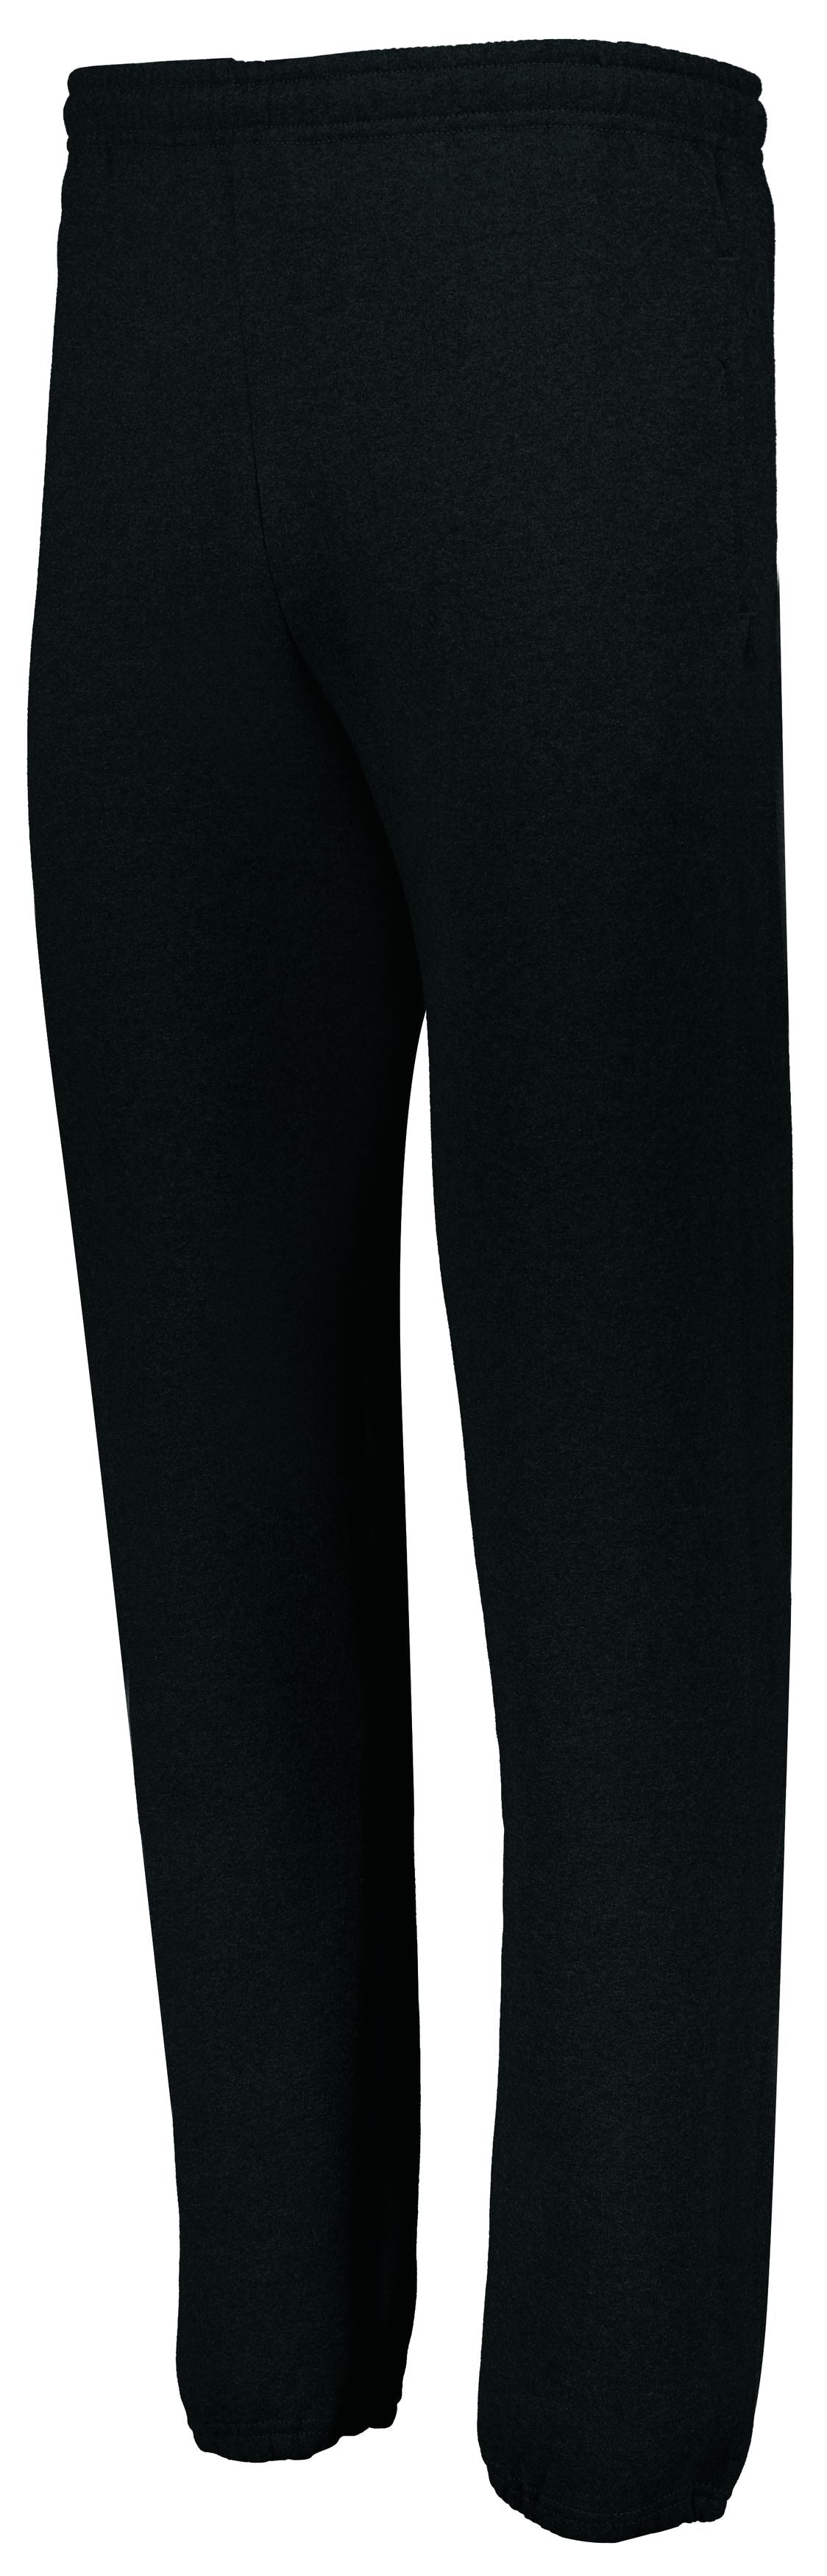 Russell Athletic Dri-Power Closed Bottom Pocket Sweatpant in Black  -Part of the Adult, Adult-Pants, Pants, Russell-Athletic-Products product lines at KanaleyCreations.com